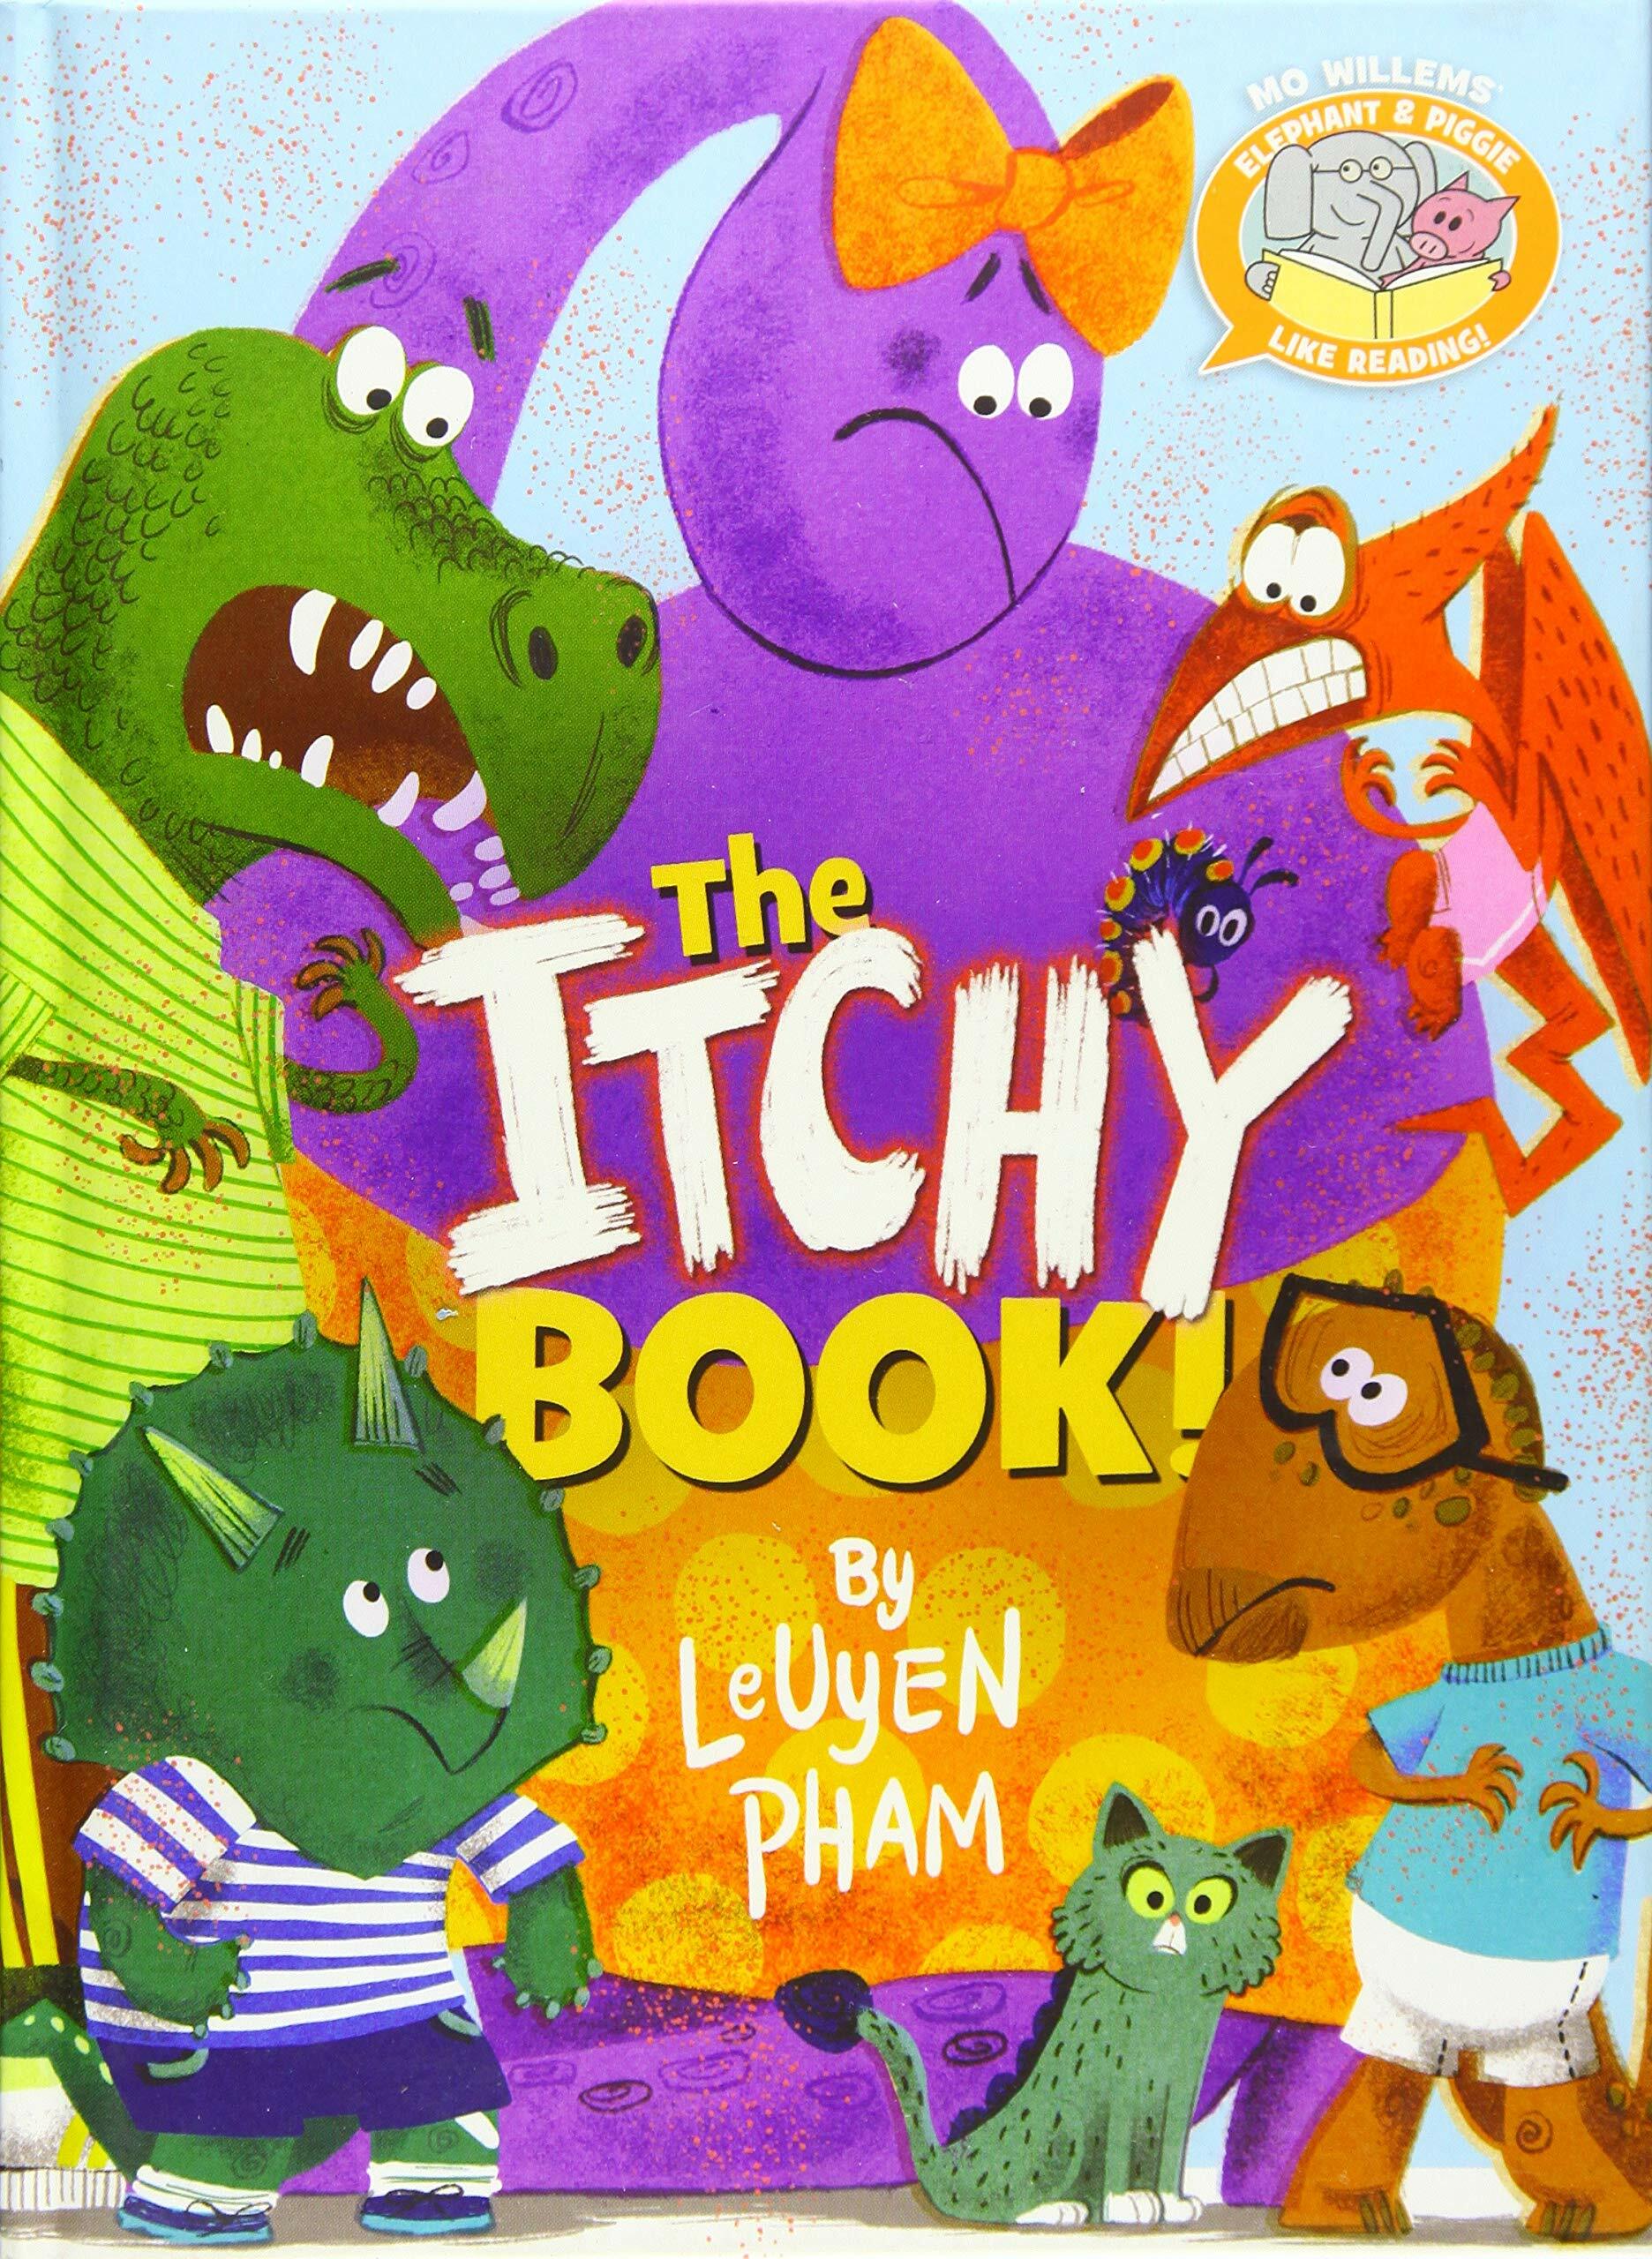 The Itchy Book!-Elephant & Piggie Like Reading! (Hardcover)